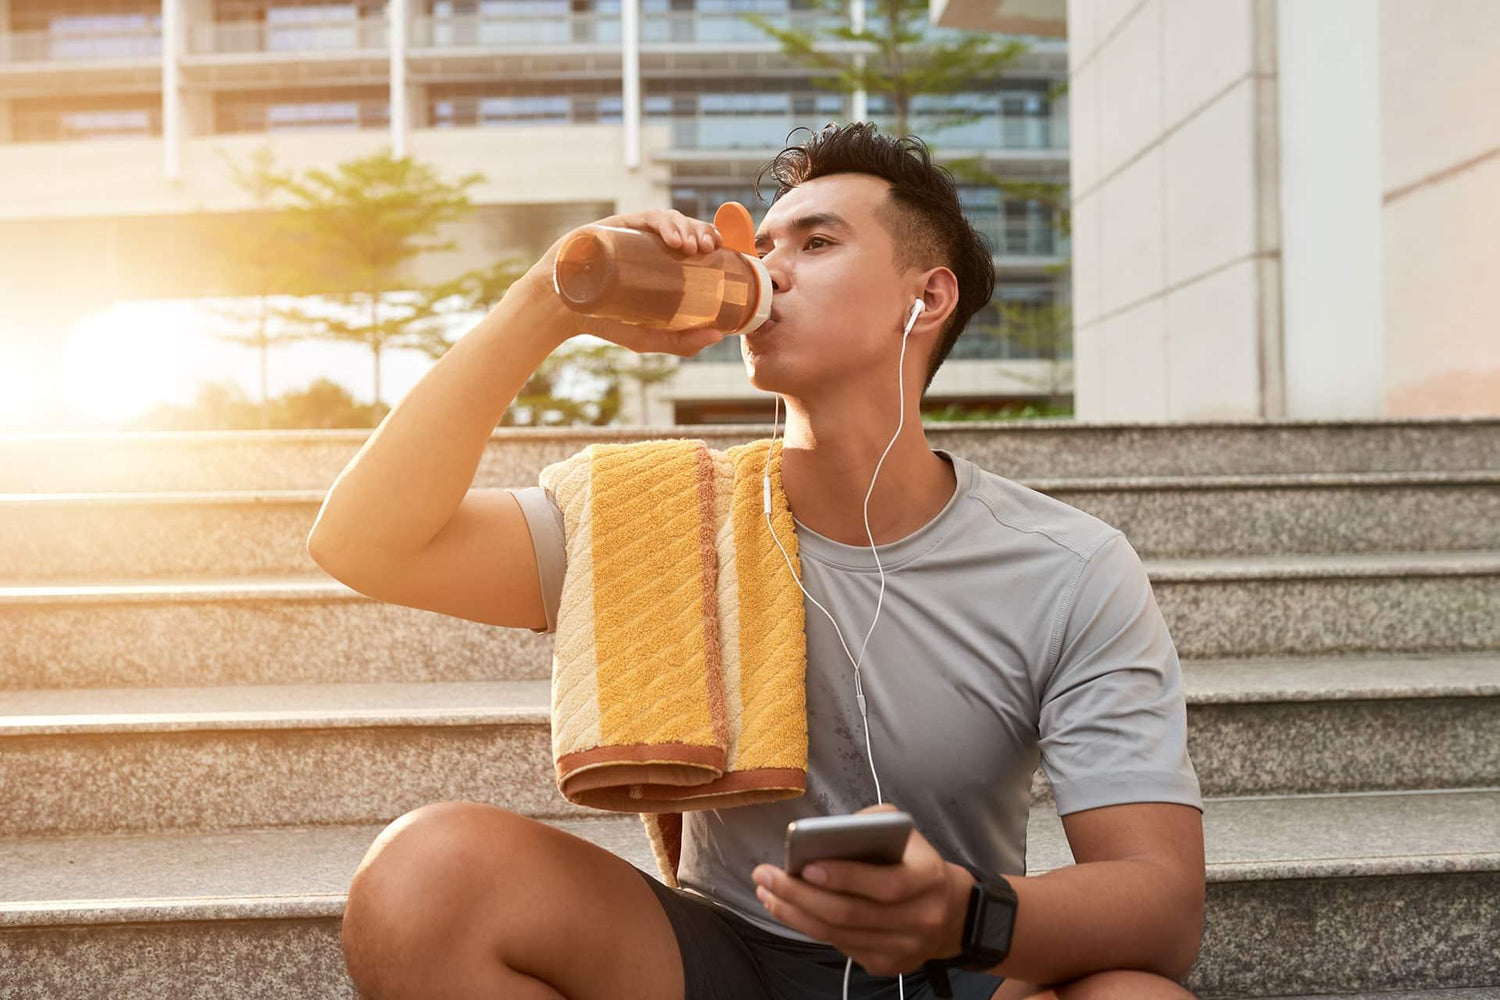 Young man rehydrating while listening to music post workout